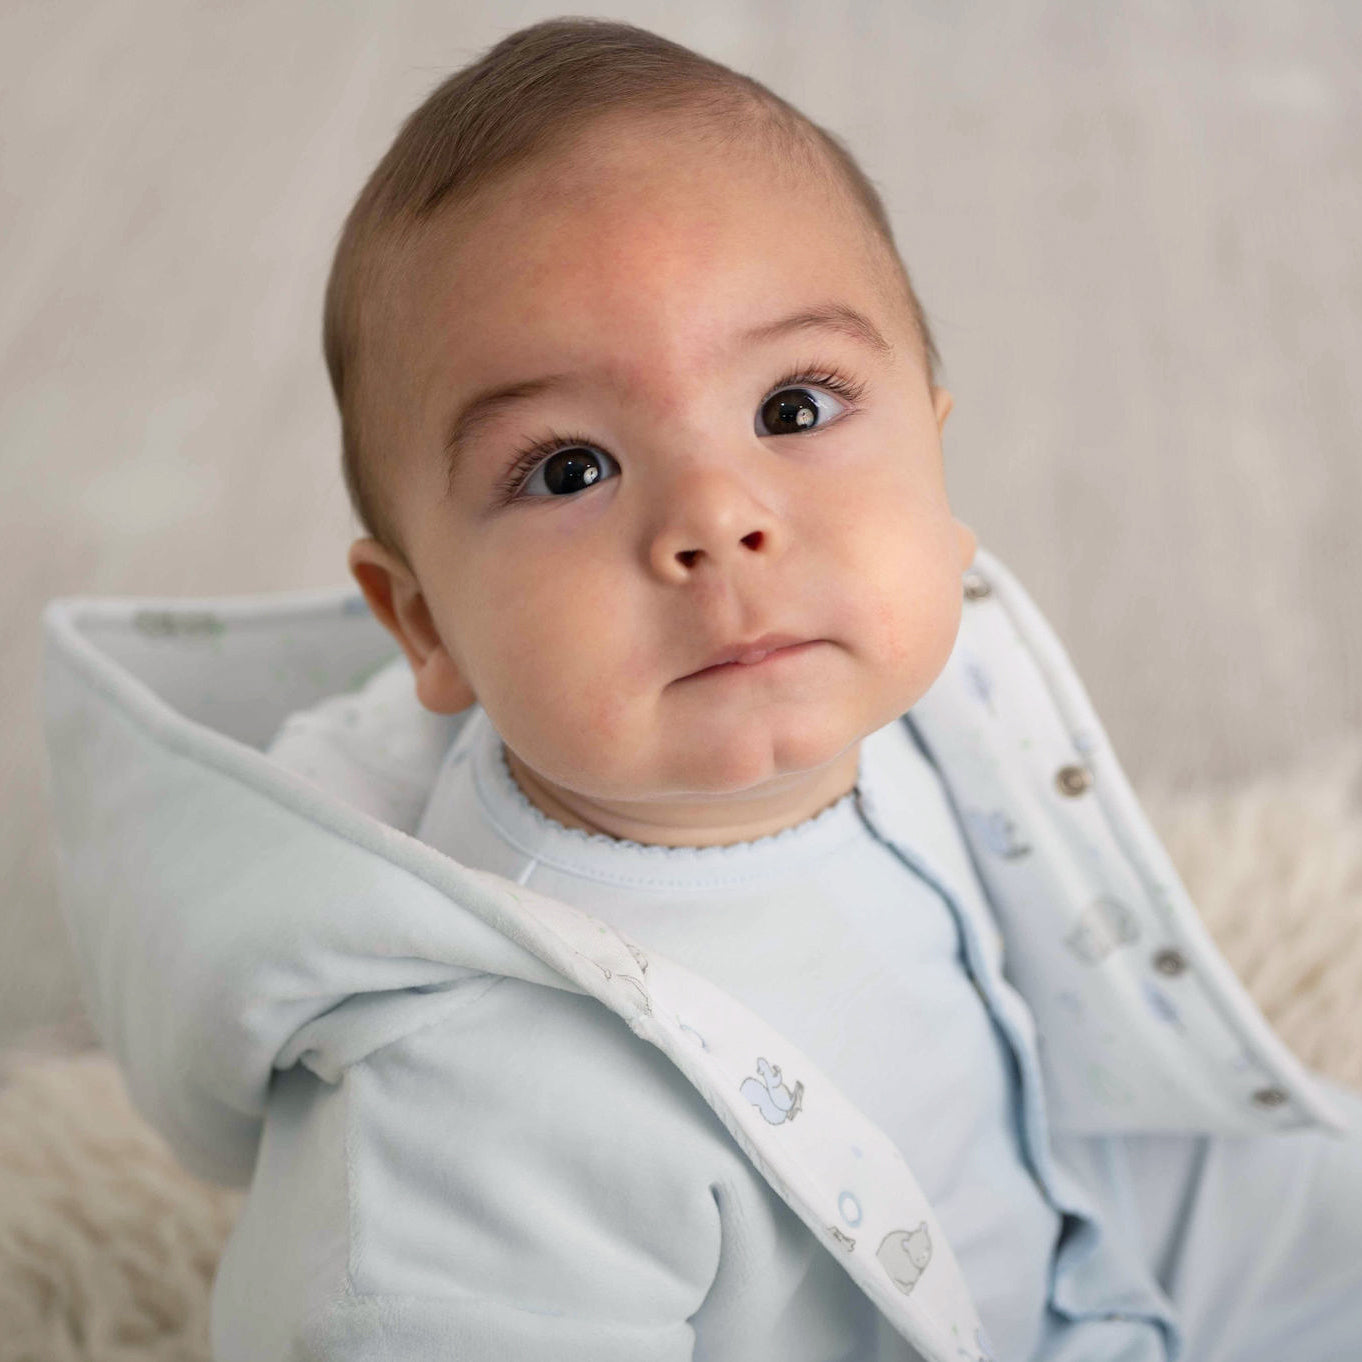 Handsome baby in a luxurious blue hooded sleepsuit, sitting on a fluffy blanket, expressing emotions